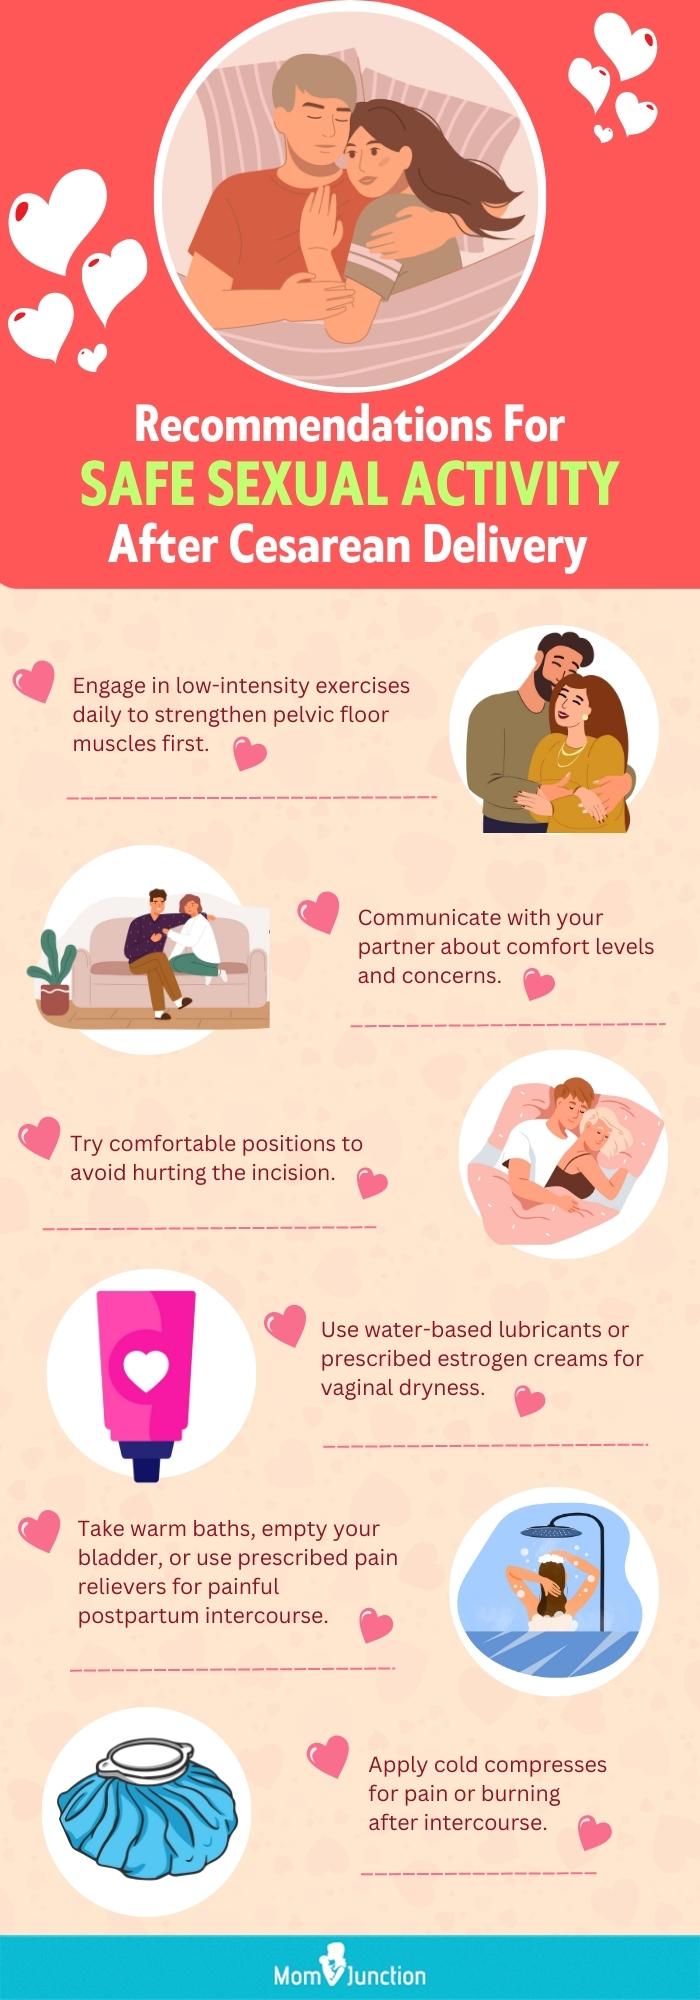 recommendations for safe sexual activity after cesarean delivery (infographic)